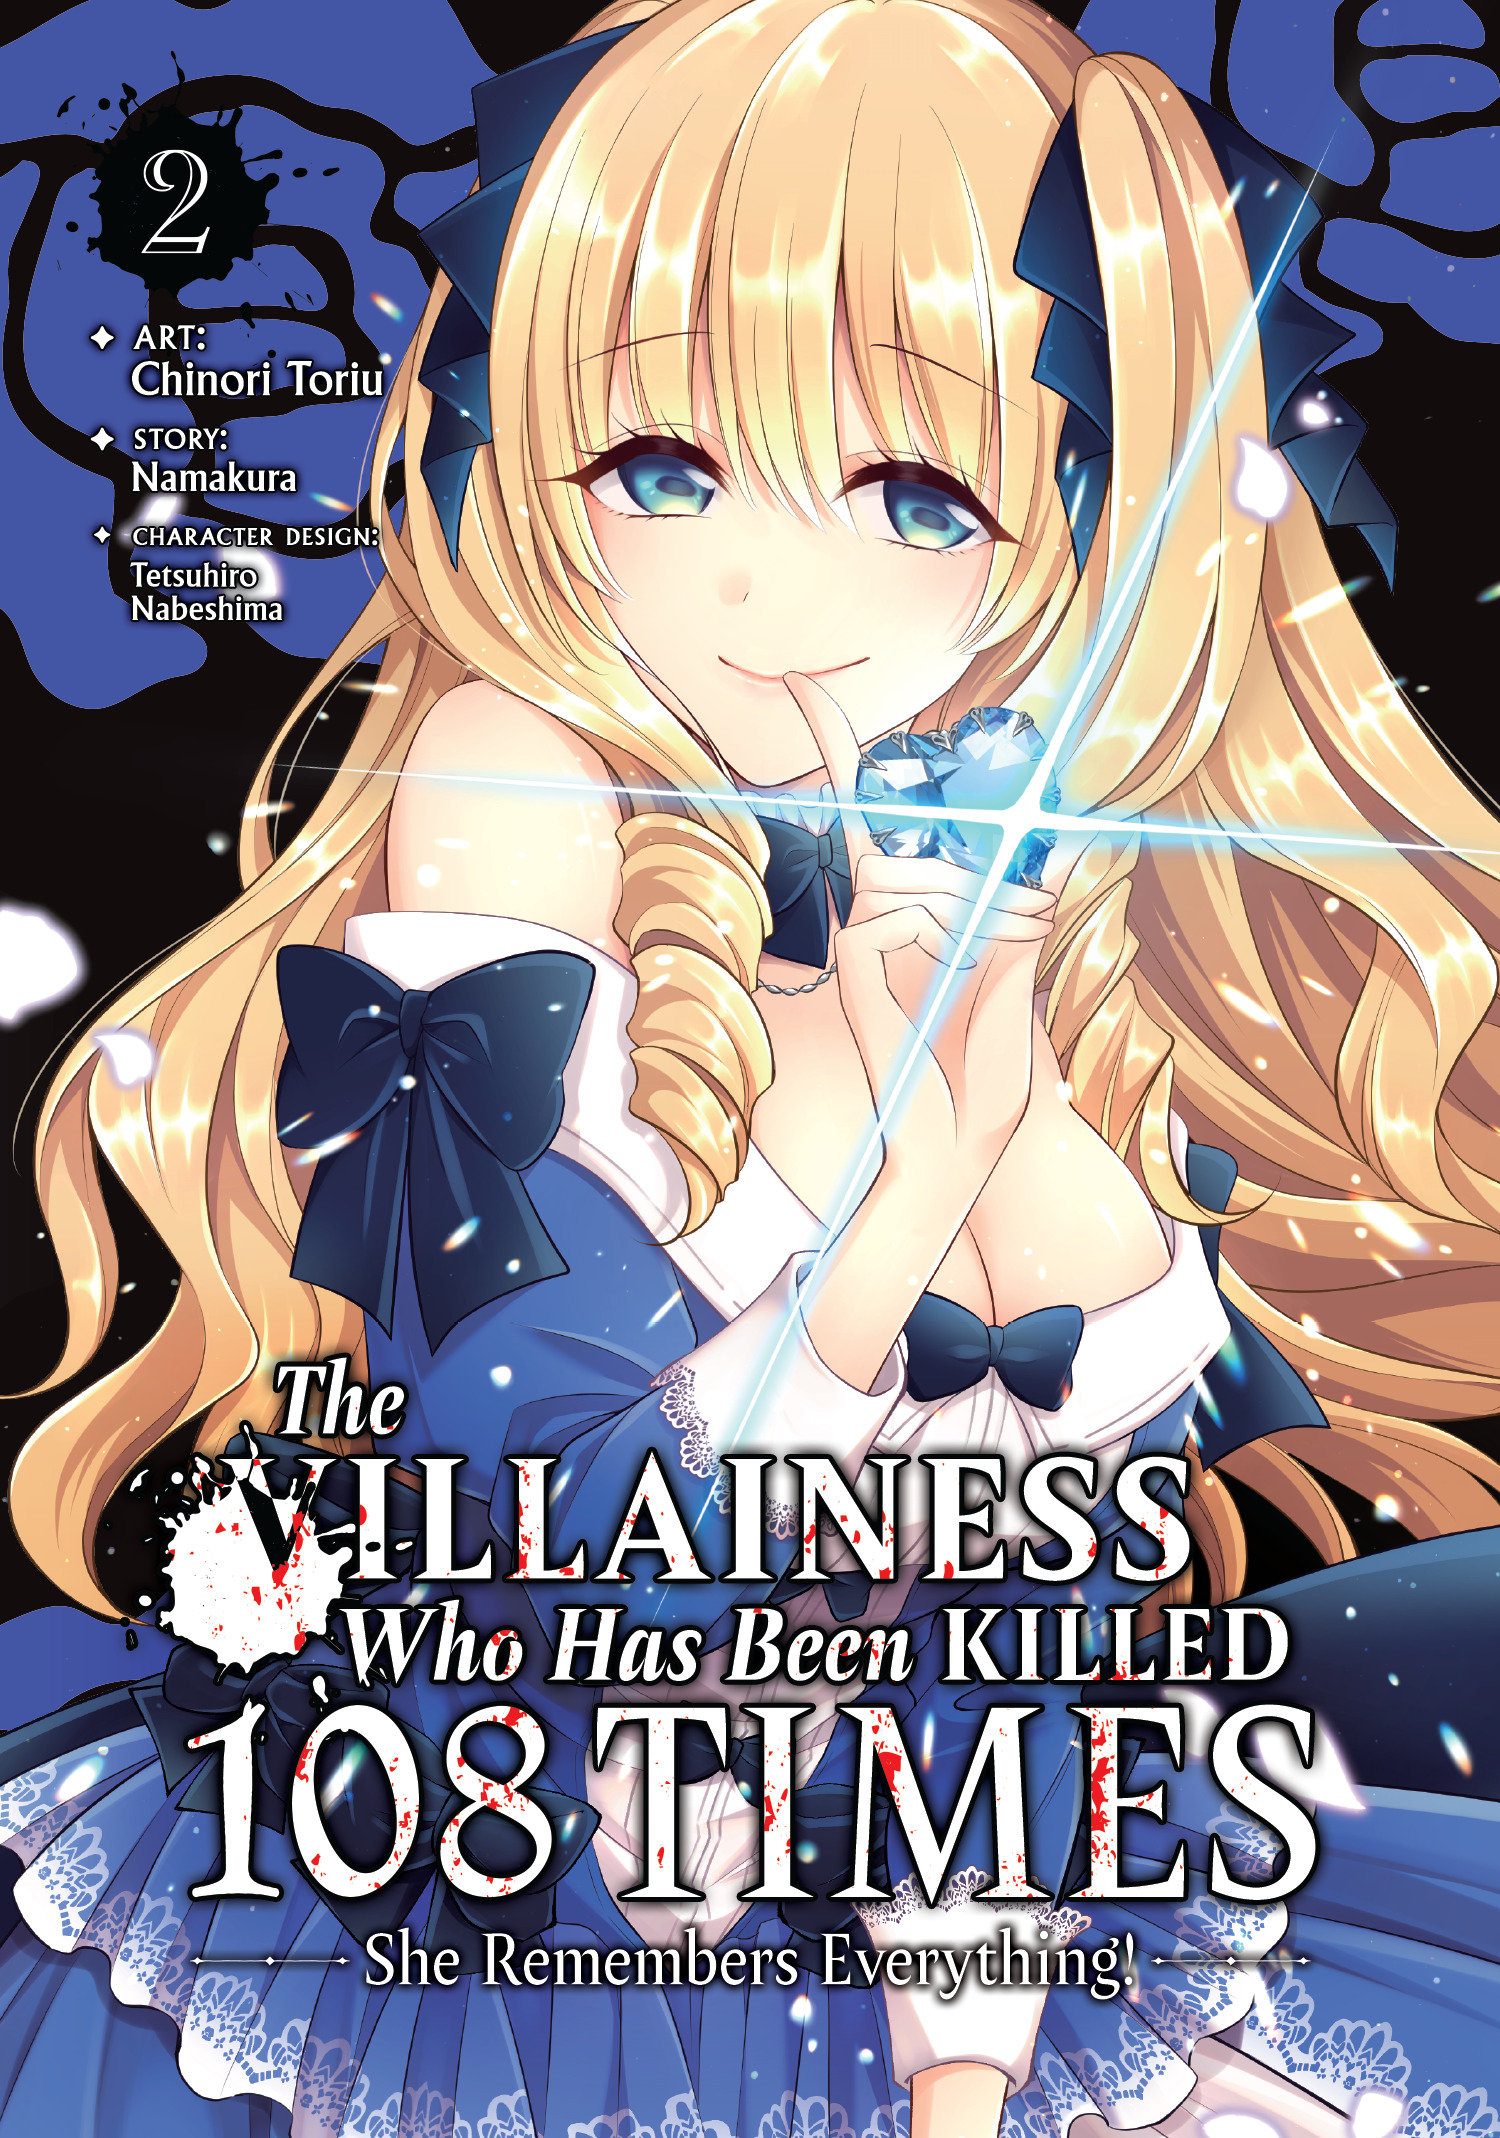 The Villainess Who Has Been Killed 108 Times She Remembers Everything! Manga Volume 2